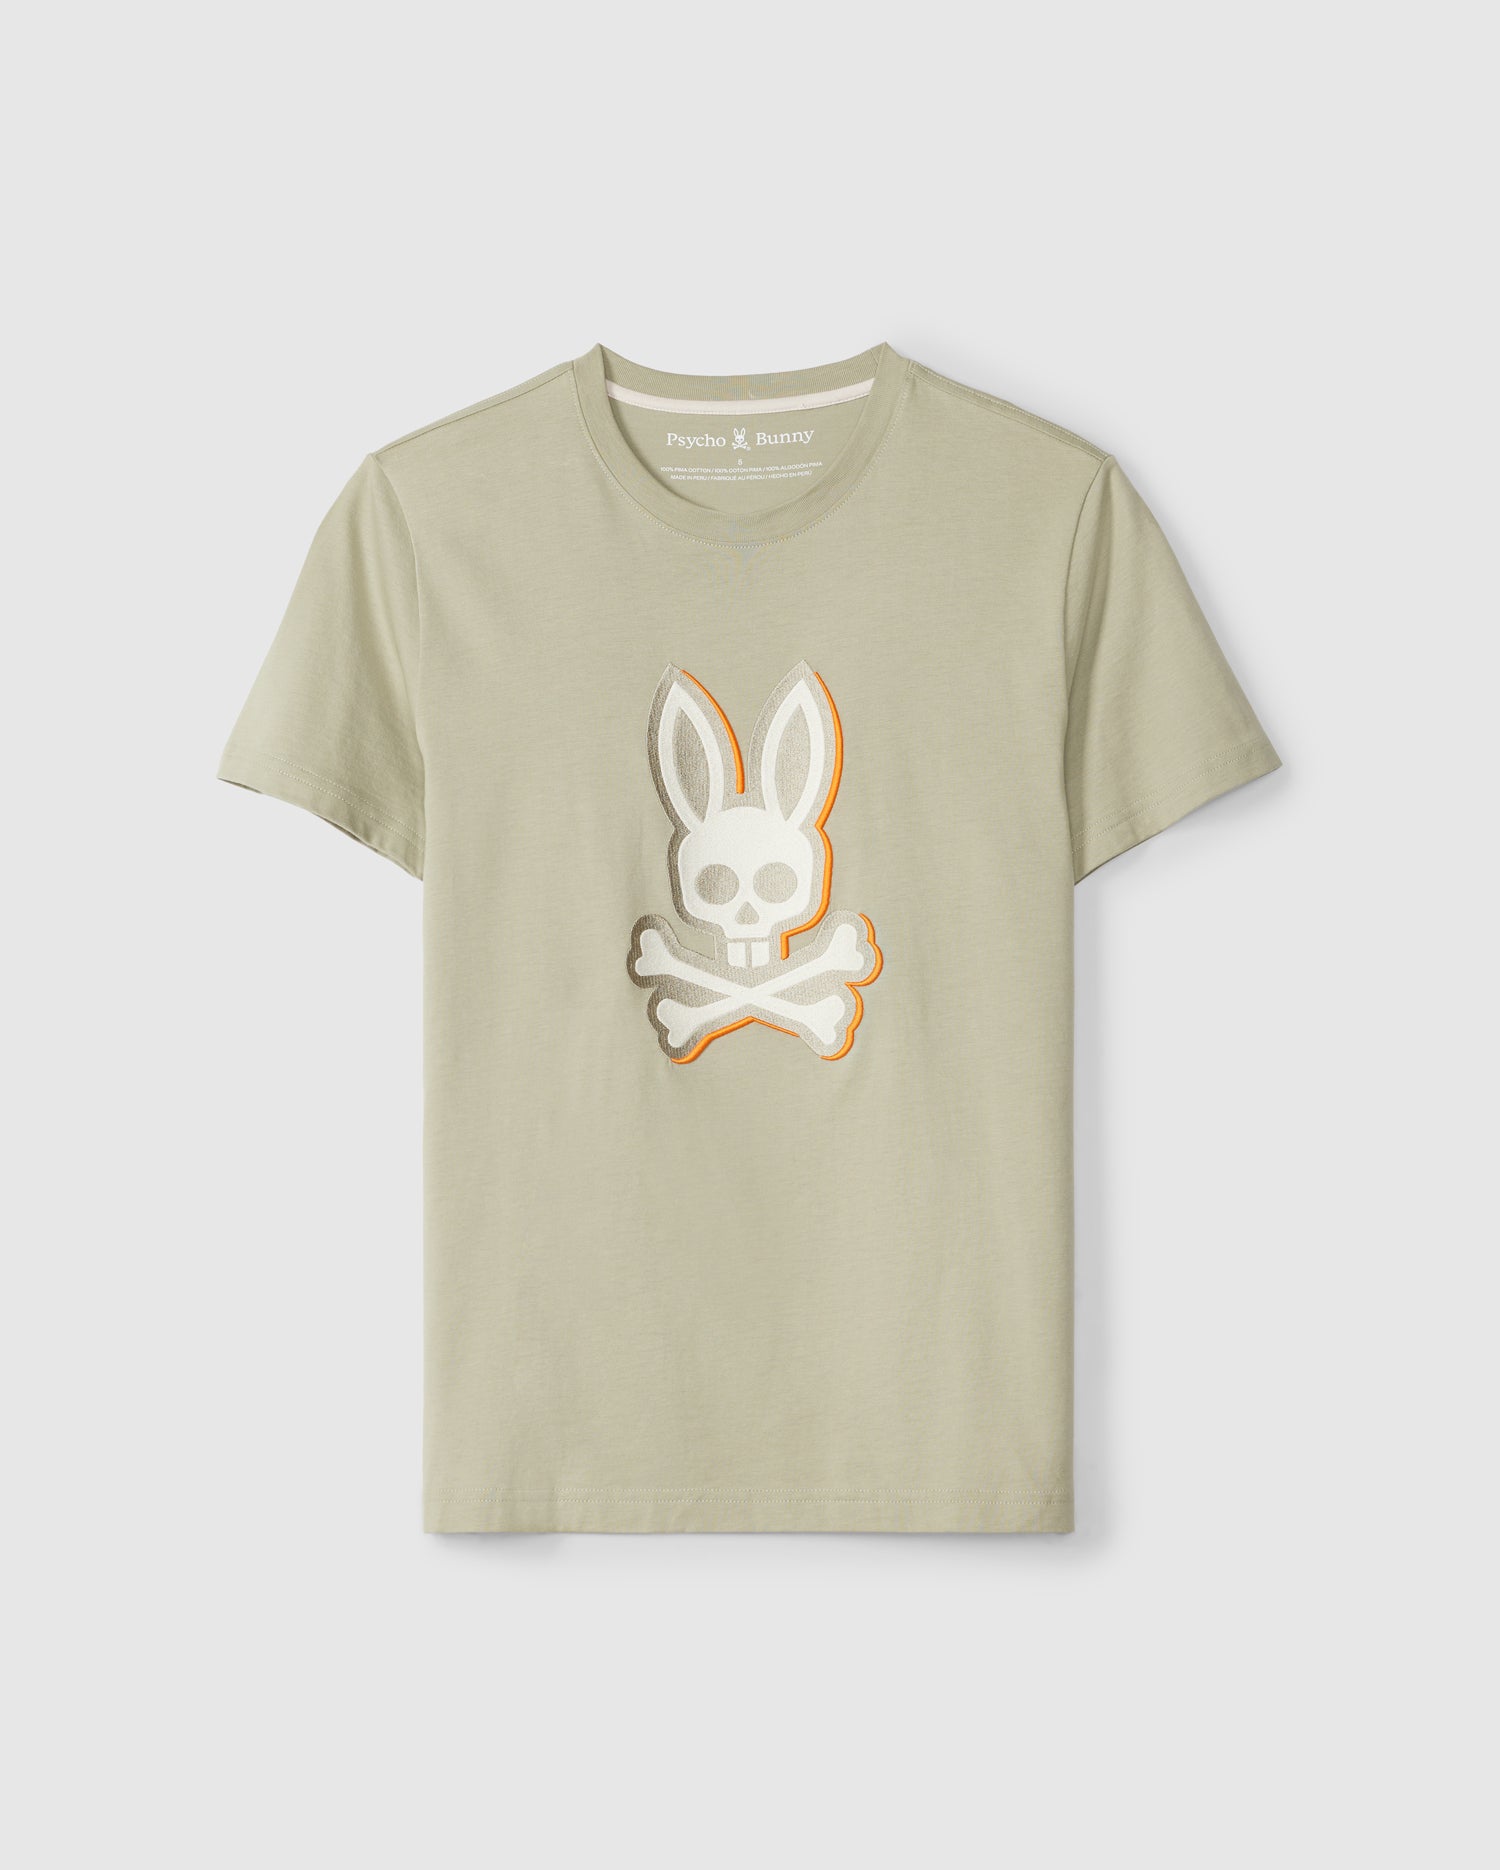 A light beige MENS KAYDEN GRAPHIC TEE - B6U676C200 featuring a stylized design of a skull with bunny ears and crossbones on the front center. Made from soft Pima cotton, the t-shirt displays the brand label 